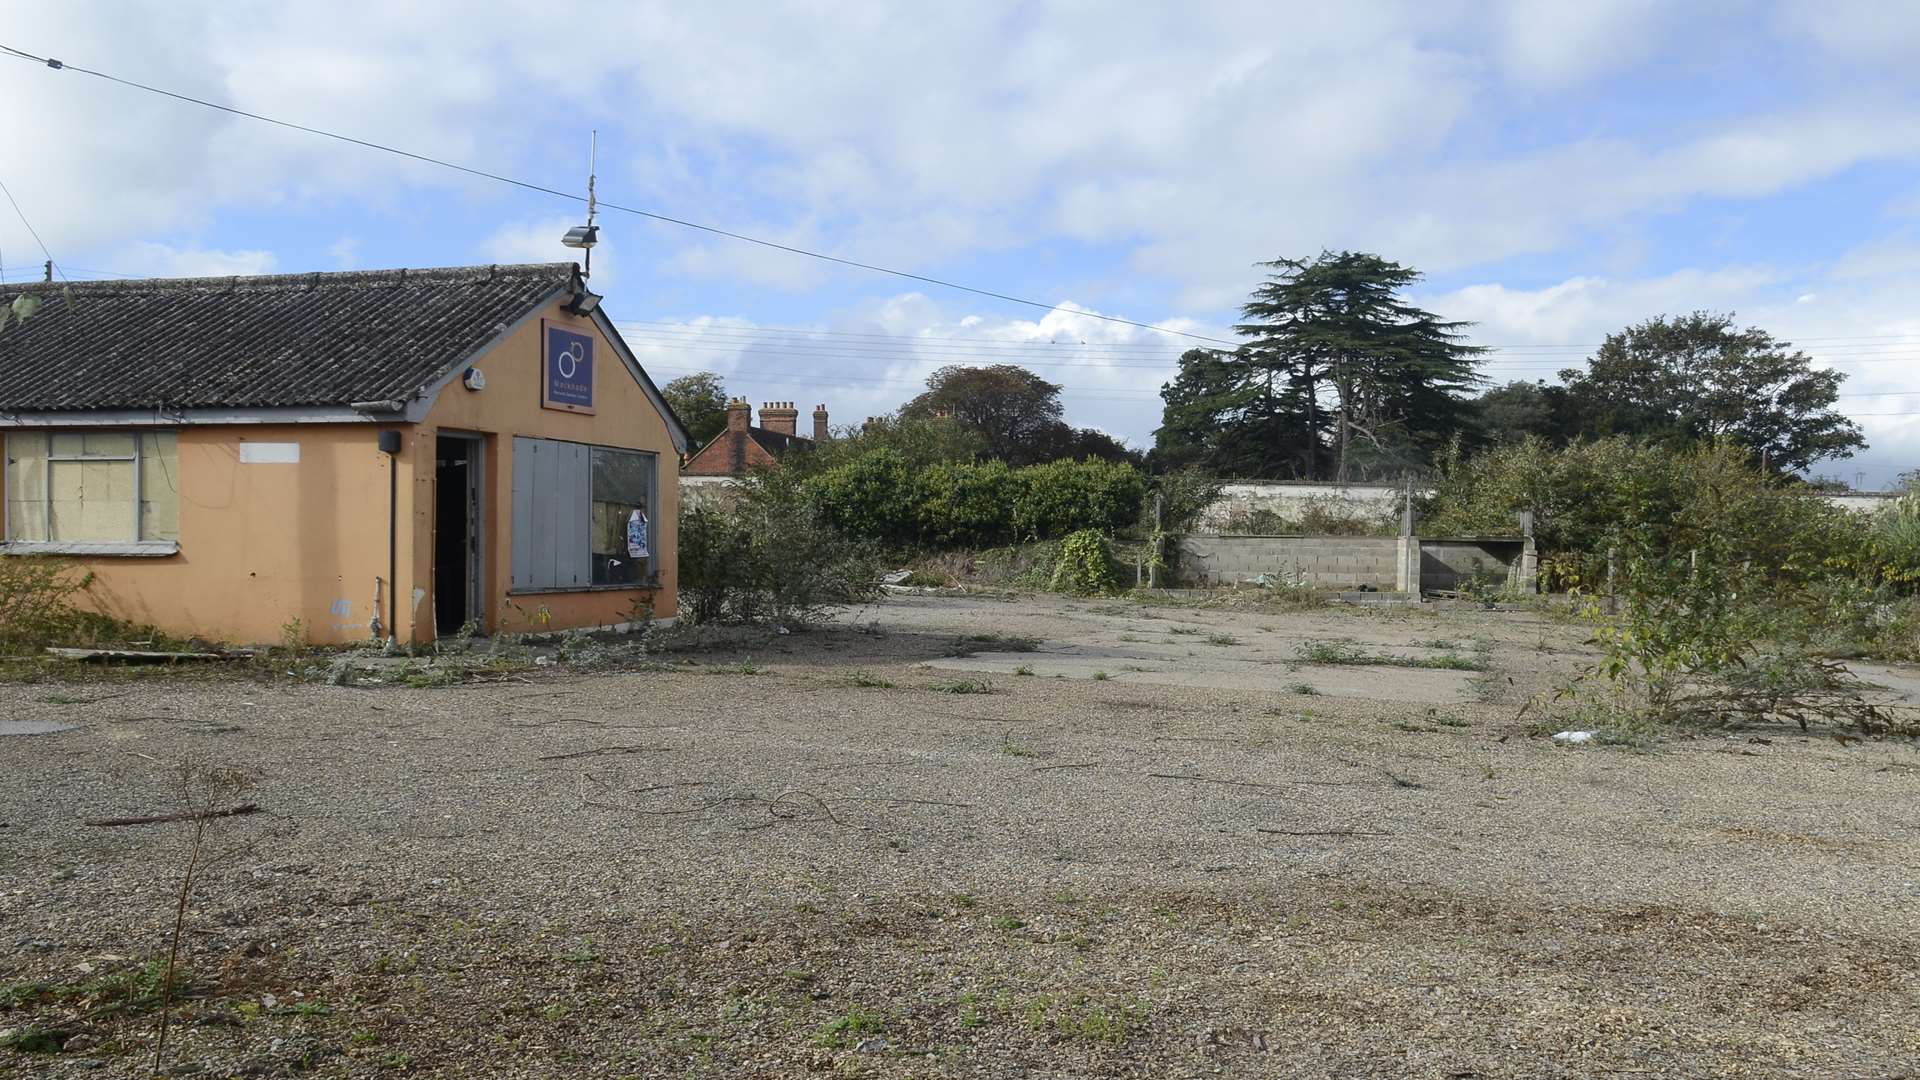 The empty site where a Marstons pub will be built